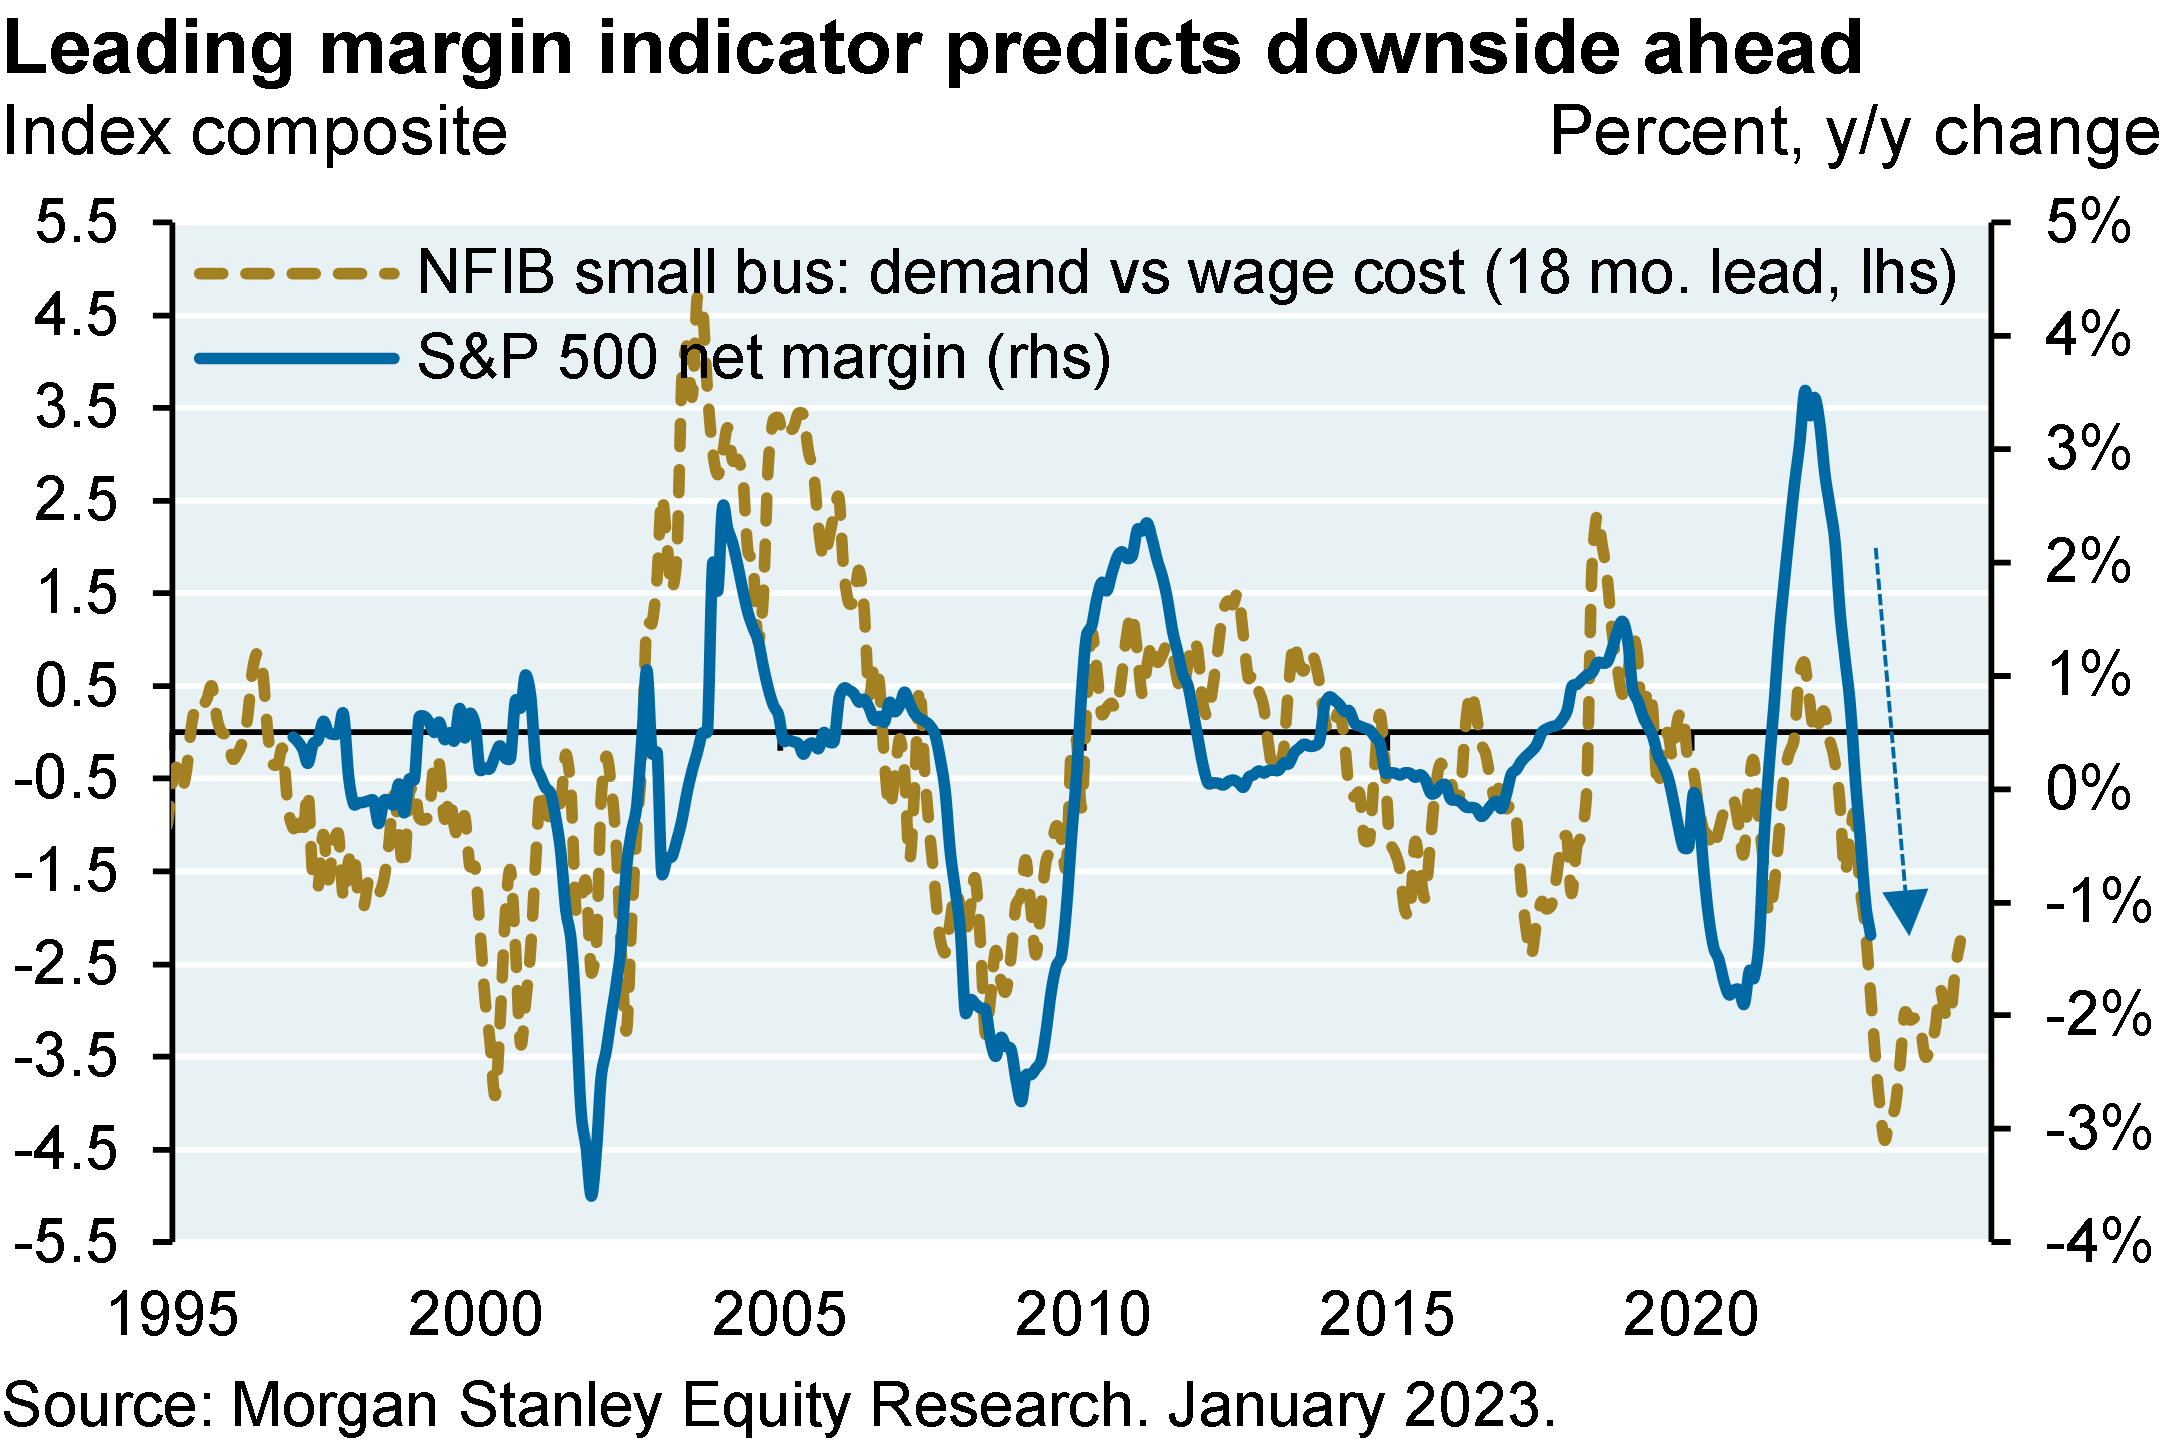 Line chart plots the S&P 500 net margin against the NFIB small business survey demand vs wage cost composite as a leading indicator from 1996 to the present. Historically, S&P 500 margins bottom around 18 months after the NFIB composite. Currently, the leading margin indicator points to more downside ahead.